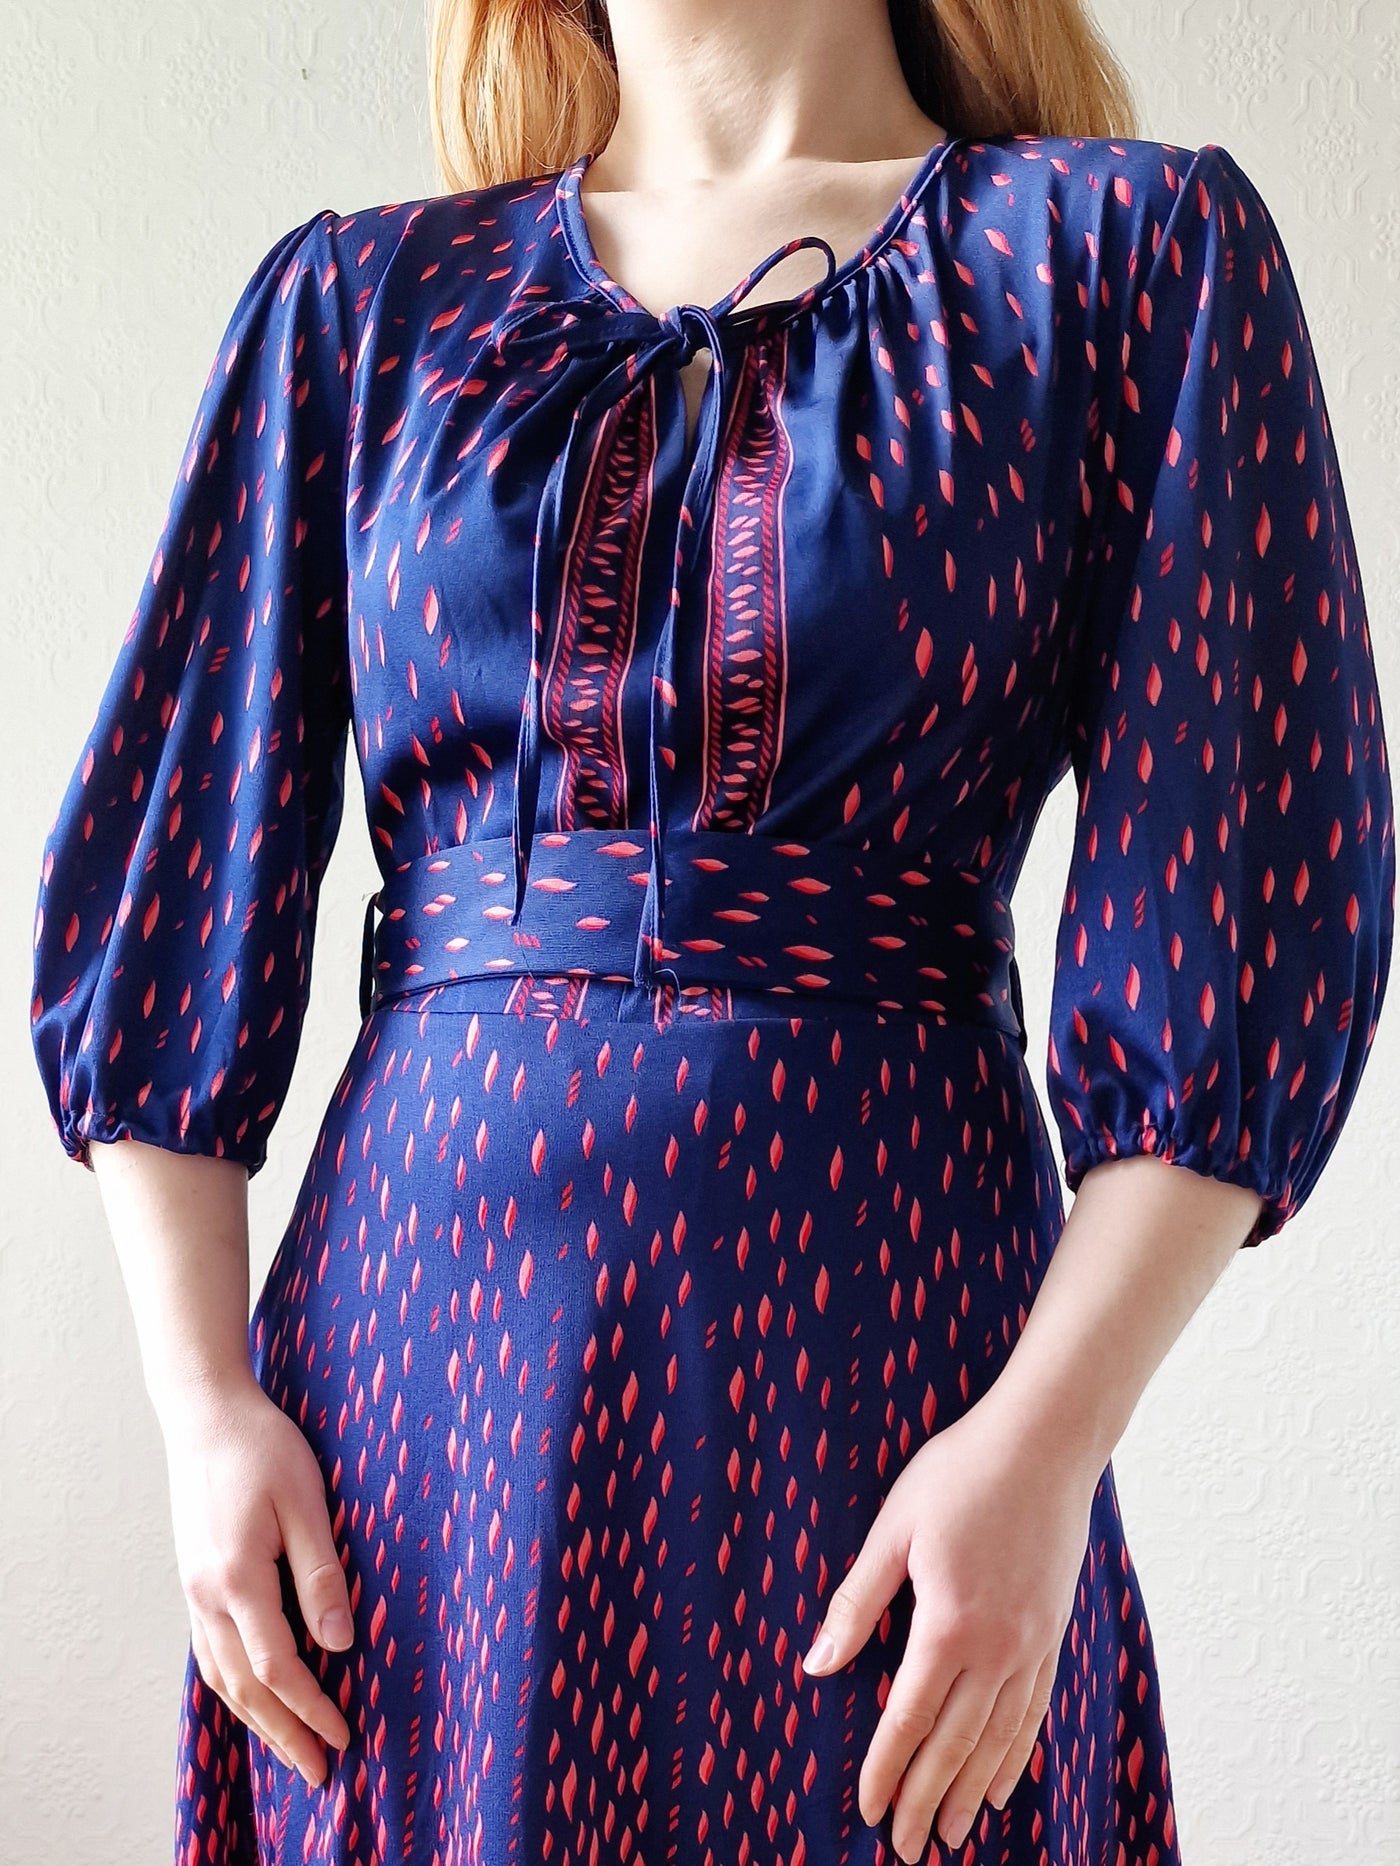 Vintage 70s Navy Blue Midi Dress with Puff Sleeves - S/M